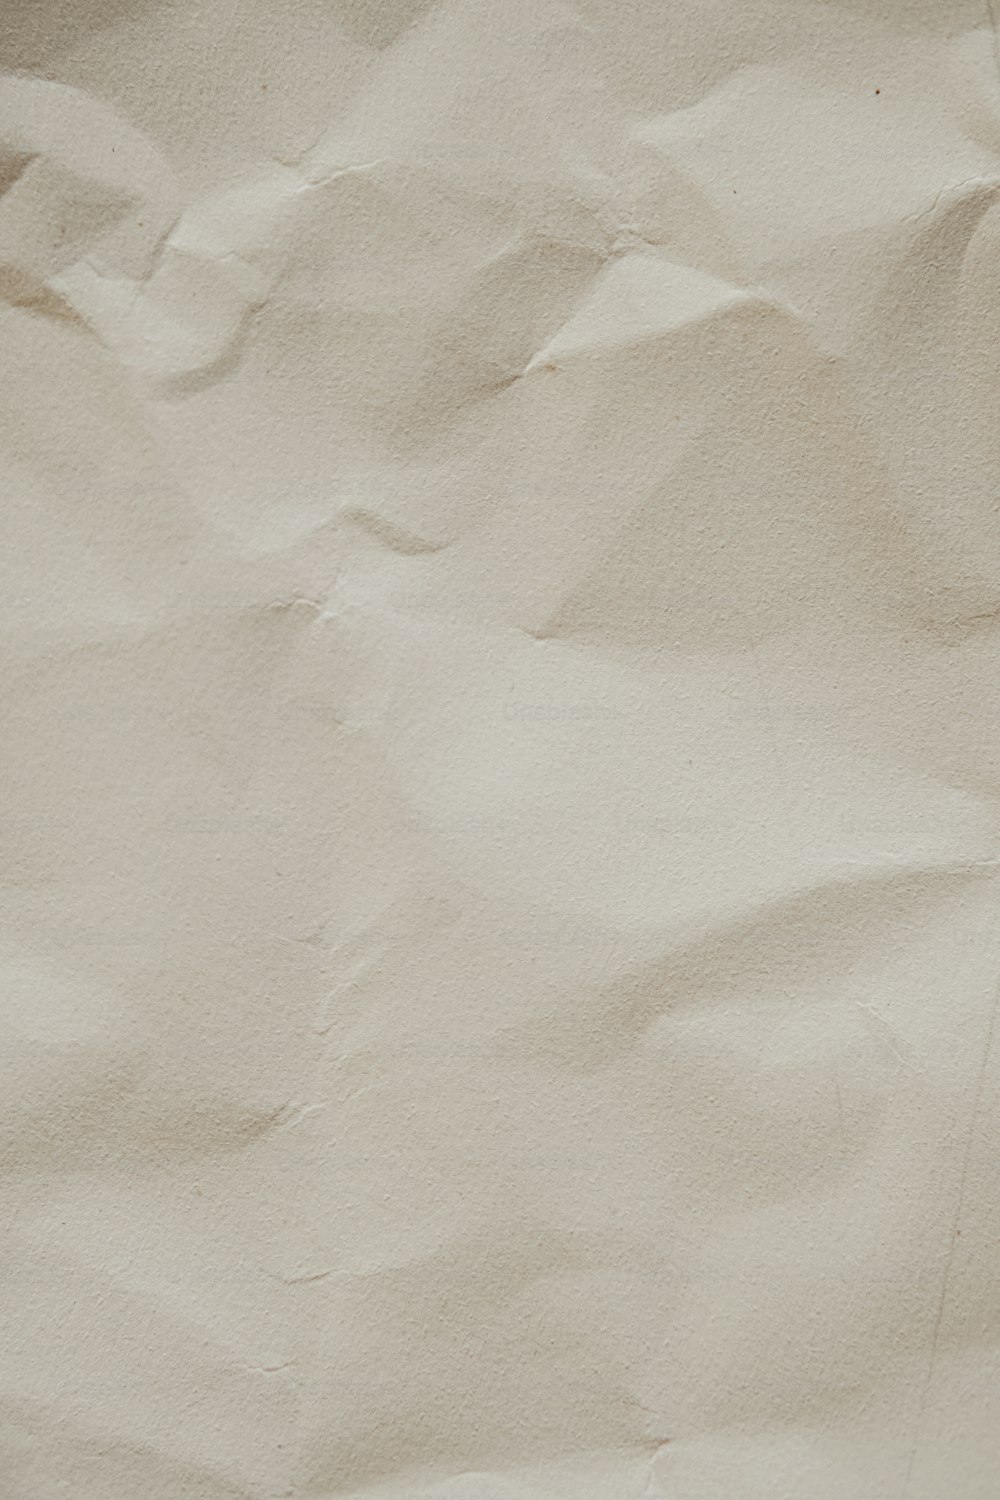 Old Paper Texture. Vintage Paper Background Or Texture; Brown Paper Texture  Stock Photo, Picture and Royalty Free Image. Image 125248764.